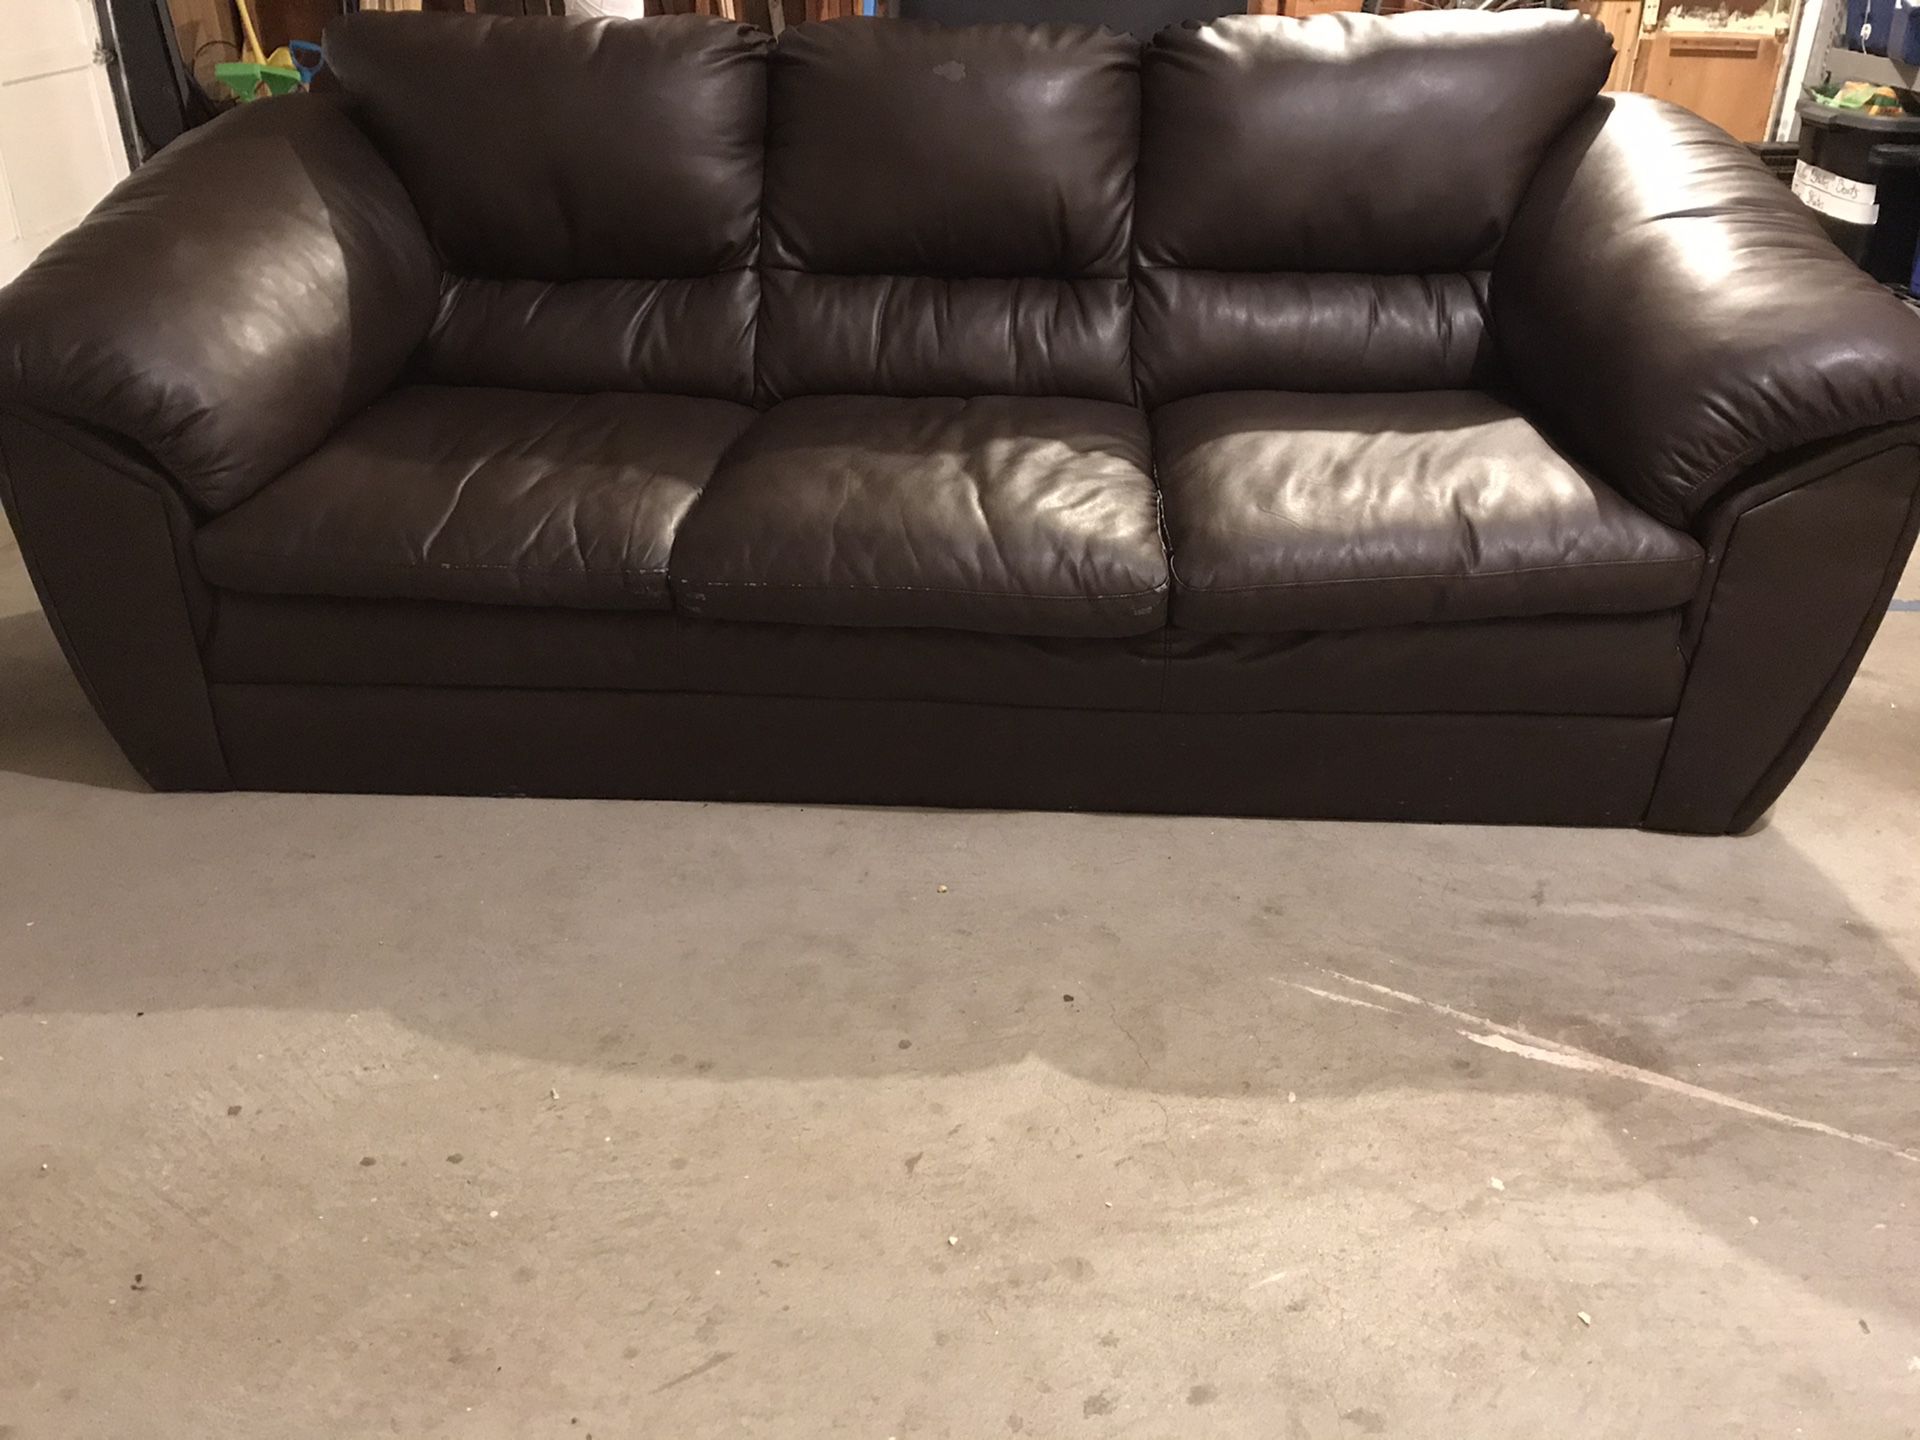 FREE Comfy, solid, leather couch